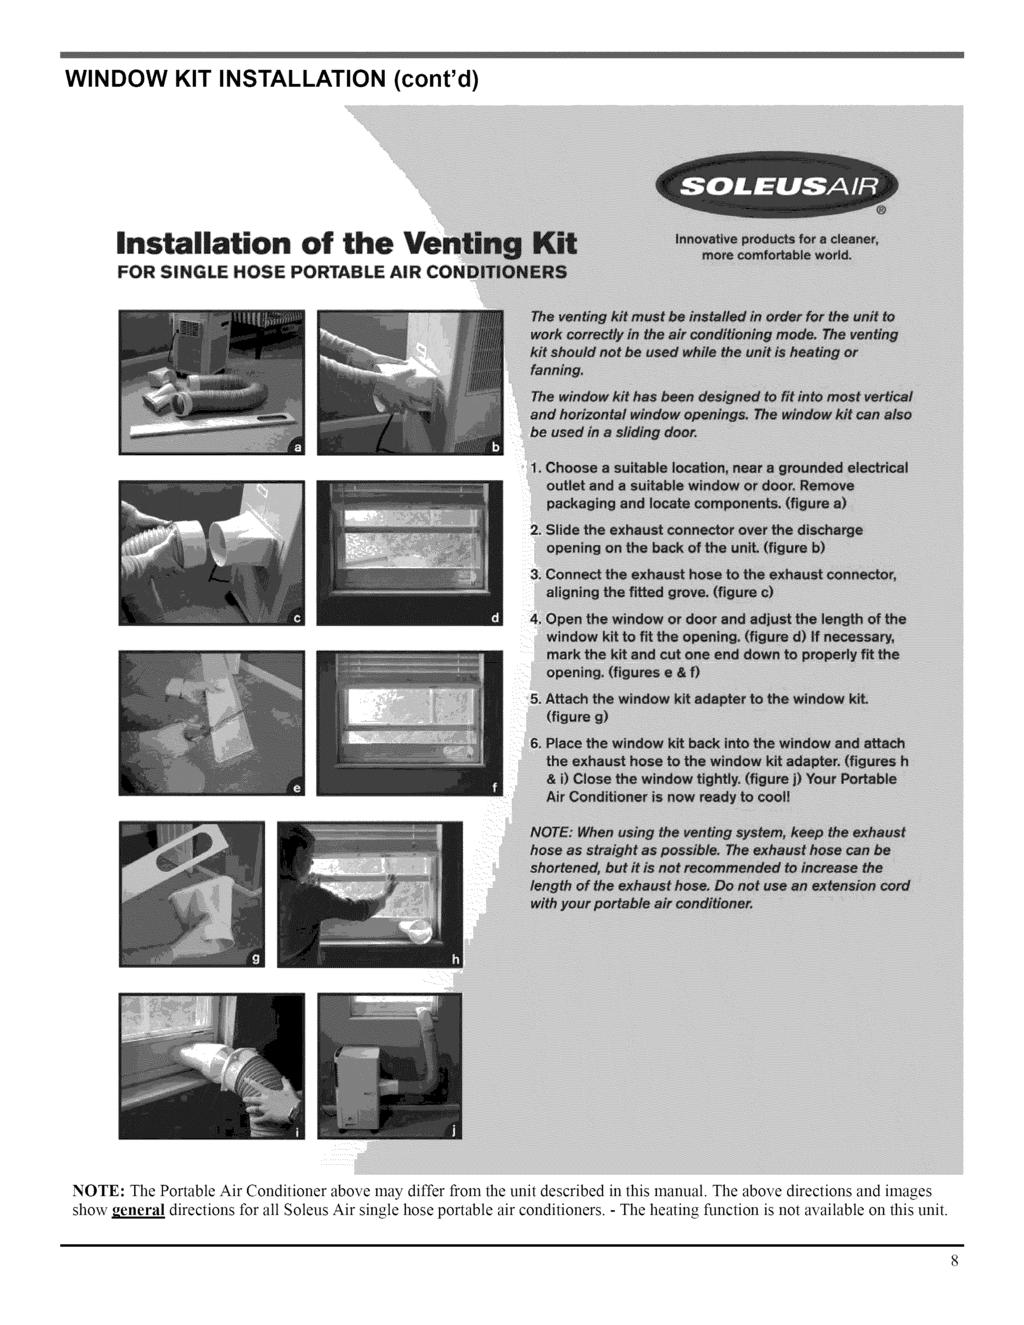 WINDOW KIT INSTALLATION Installation (cont'd) of the FOR StNGLE HOSE PORTABLE NOTE: The Portable Air Conditioner above may differ from the unit described in this manual.